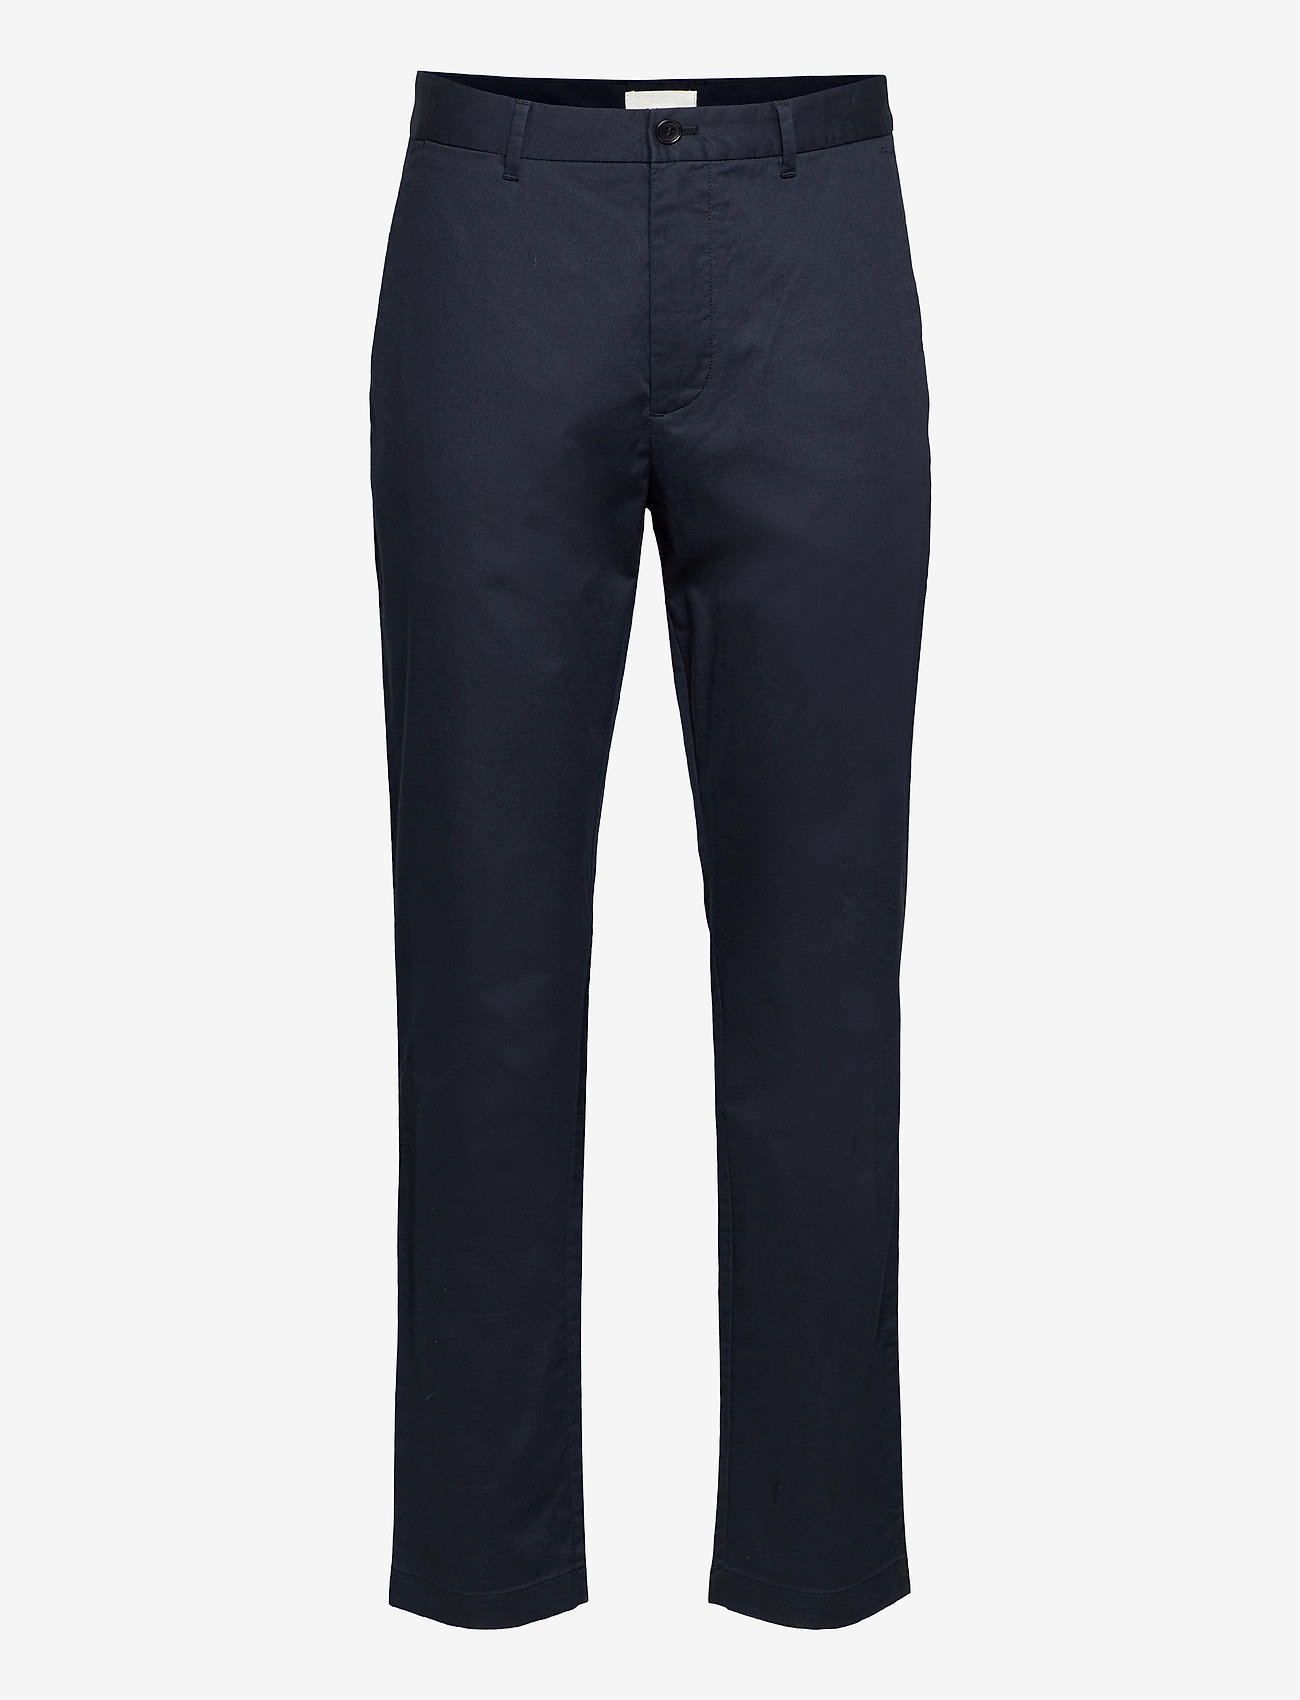 Wood Wood - Marcus light twill trousers - chino's - navy - 0